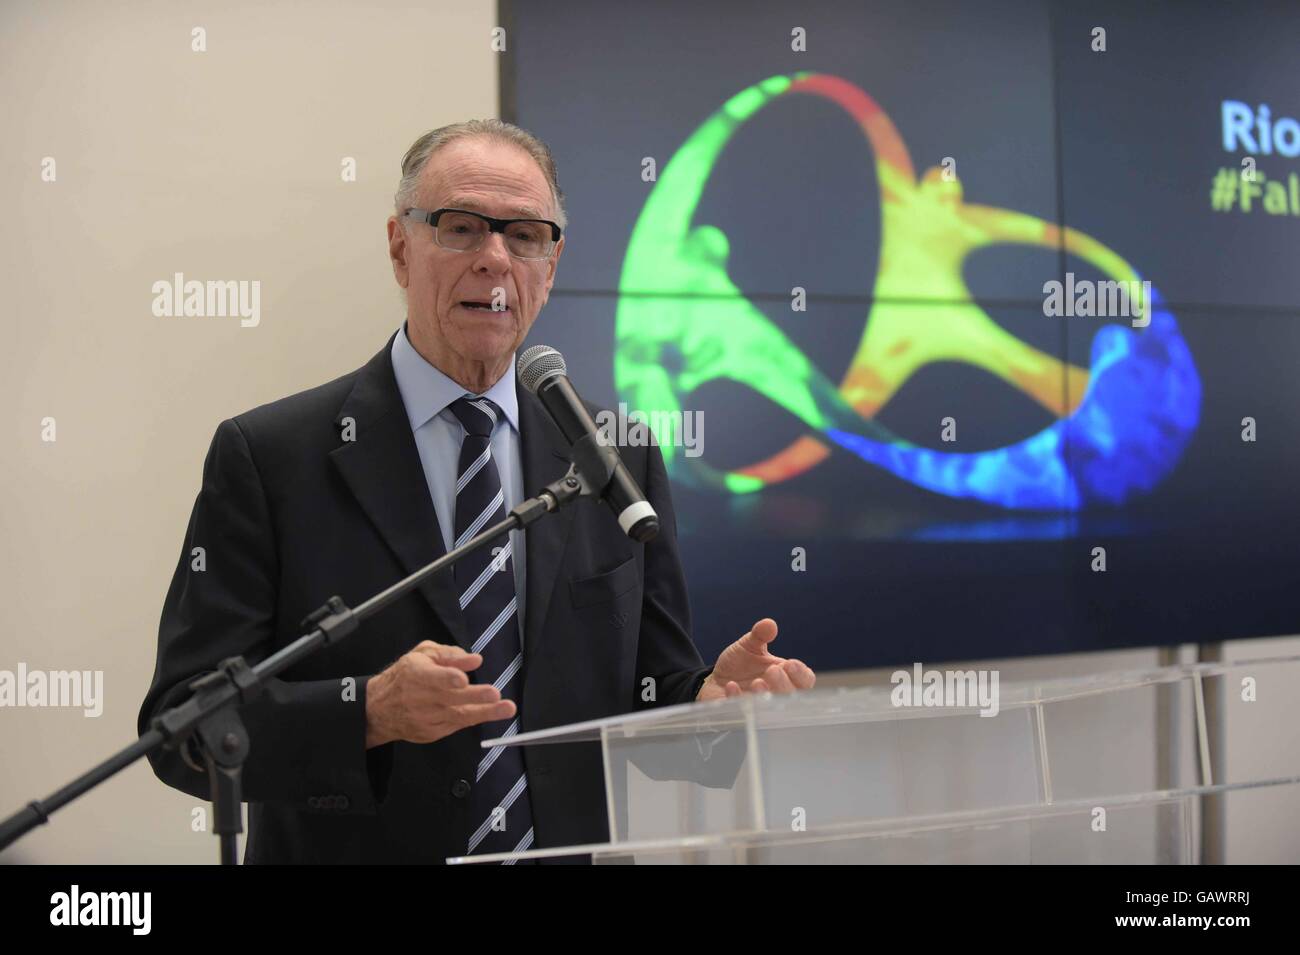 Christophe Dubi, executive director of the IOC participates in inauguration of the Nave Museum of Knowledge and Olympic City, which are next to the Olympic Stadium in the Engenho de Dentro. The site will have interactive content related to Olympic sports. Also participating in the event the mayor of Rio, Eduardo Paes and the president of the Rio 2016 Committee, Carlos Arthur Nuzman. Stock Photo